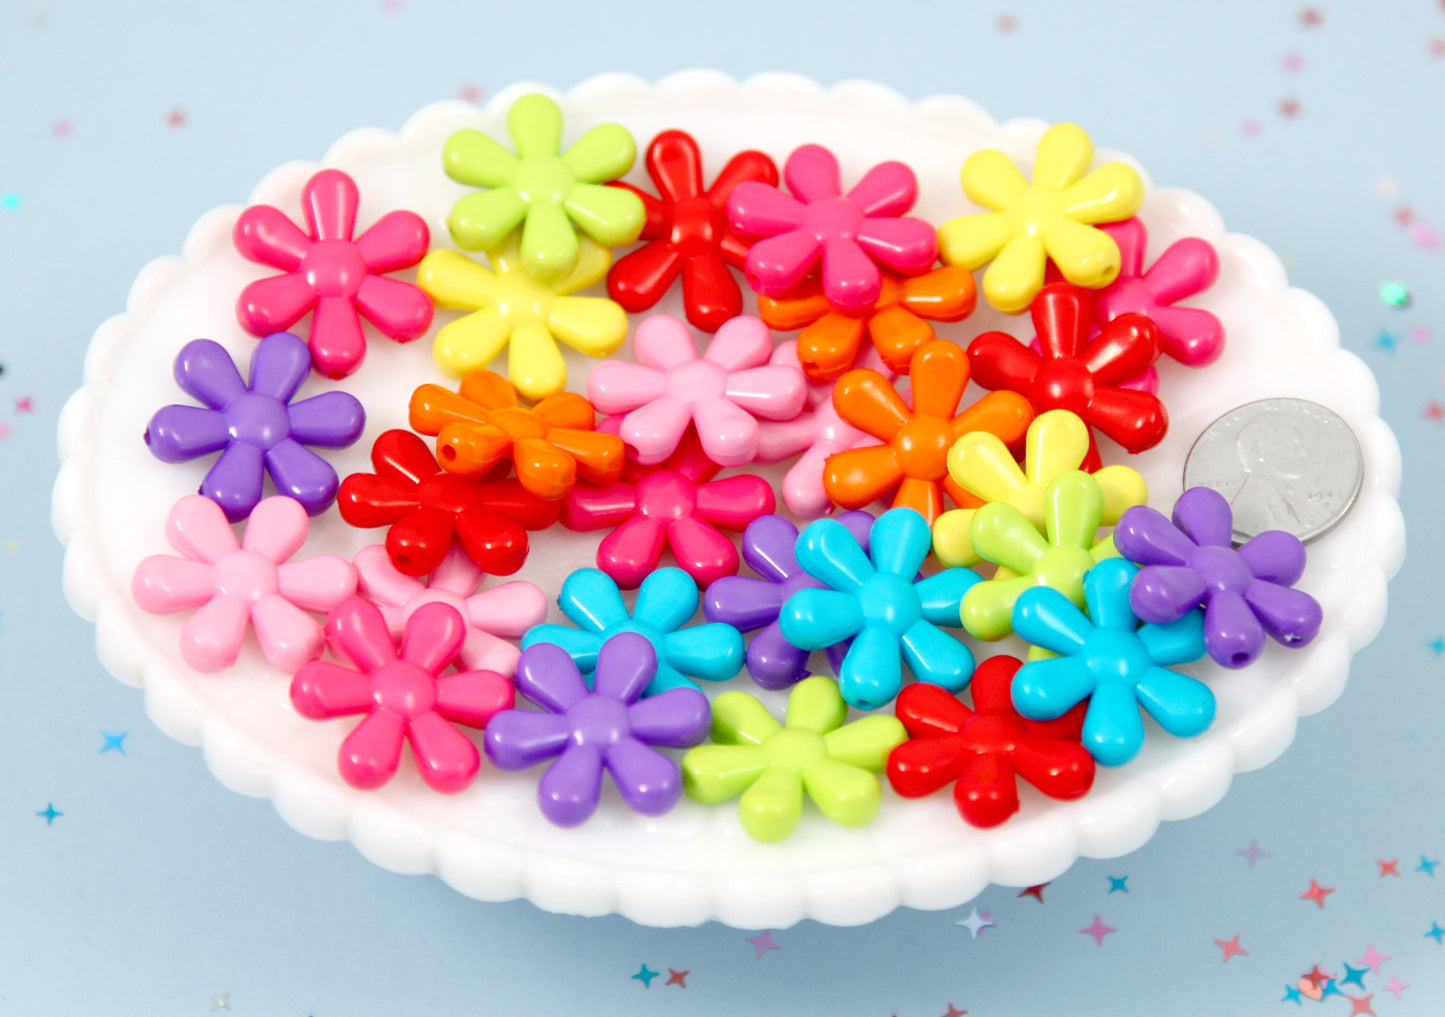 Flower Beads - 23mm Big Colorful Opaque Retro Flower Bead Plastic Acrylic or Resin Beads – 40 pc set